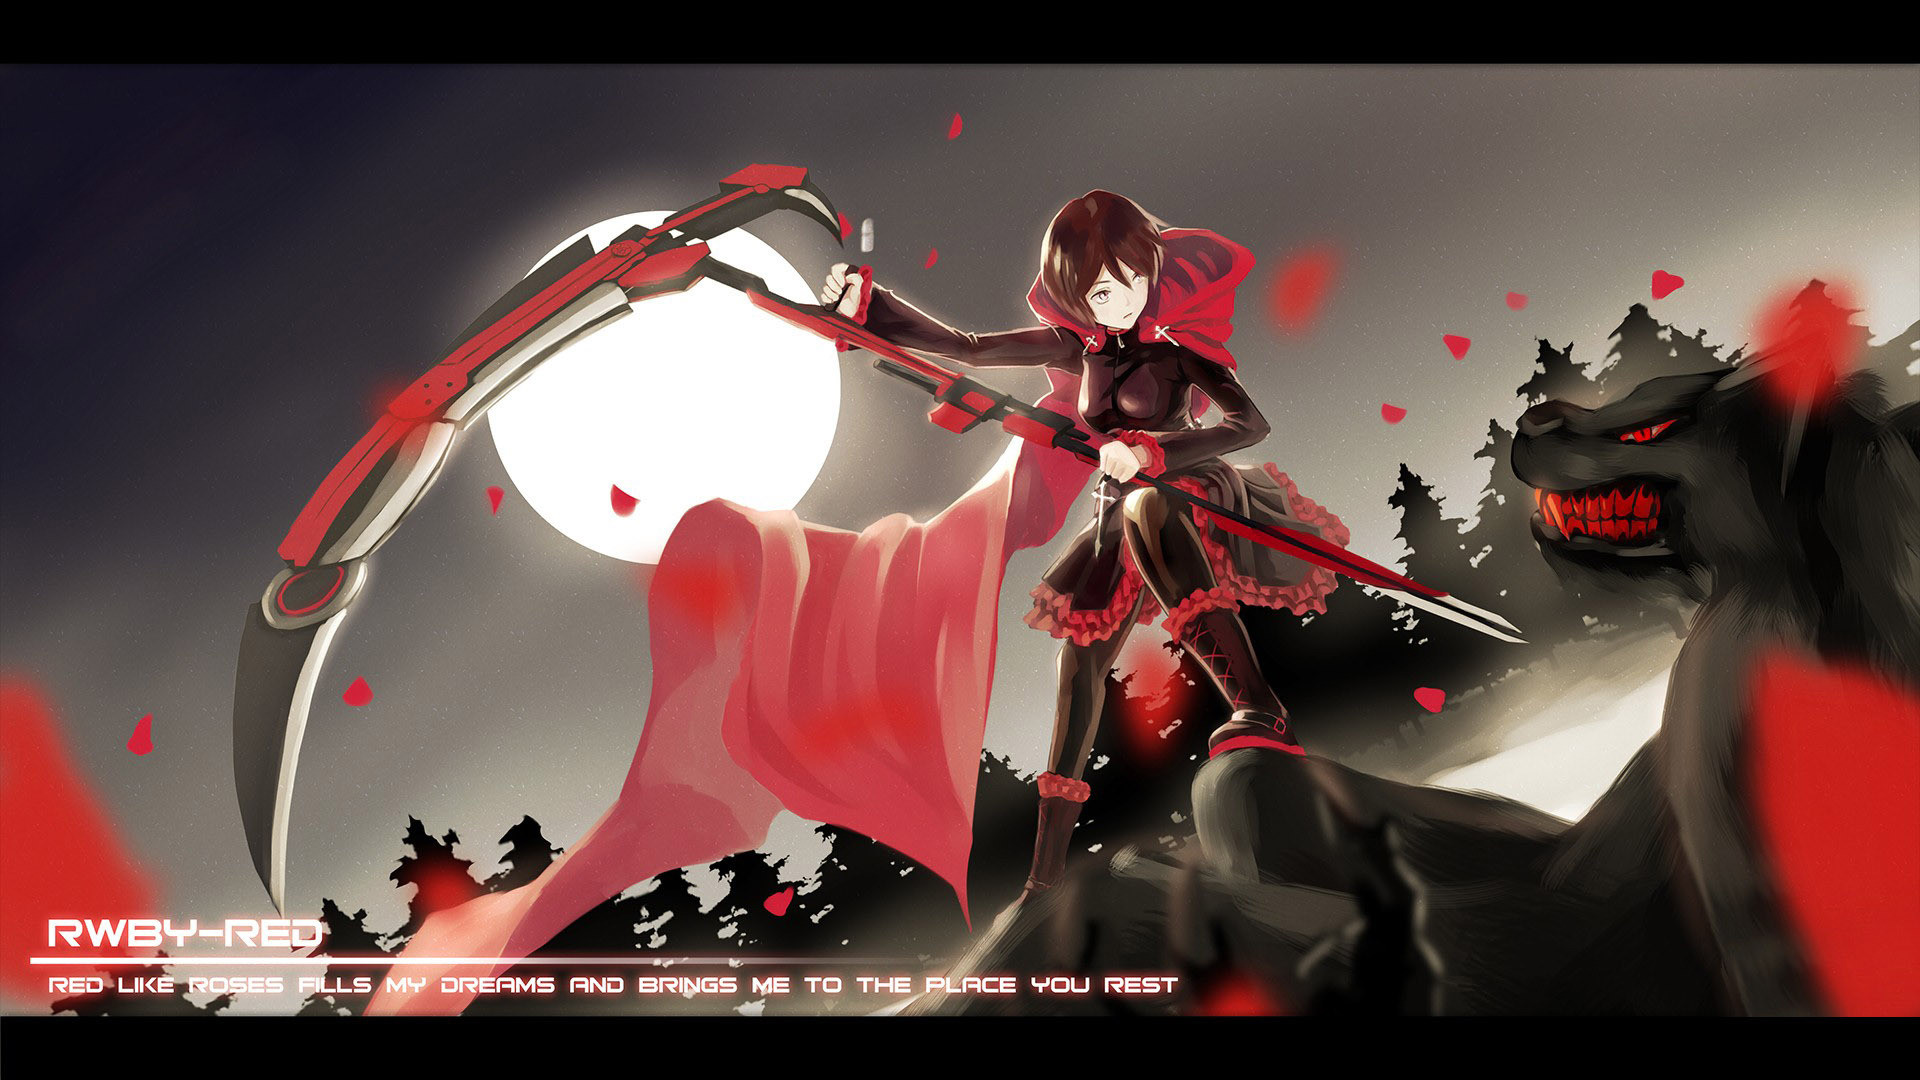 1920x1080 Ruby Rose RWBY wallpapers (24 Wallpapers)